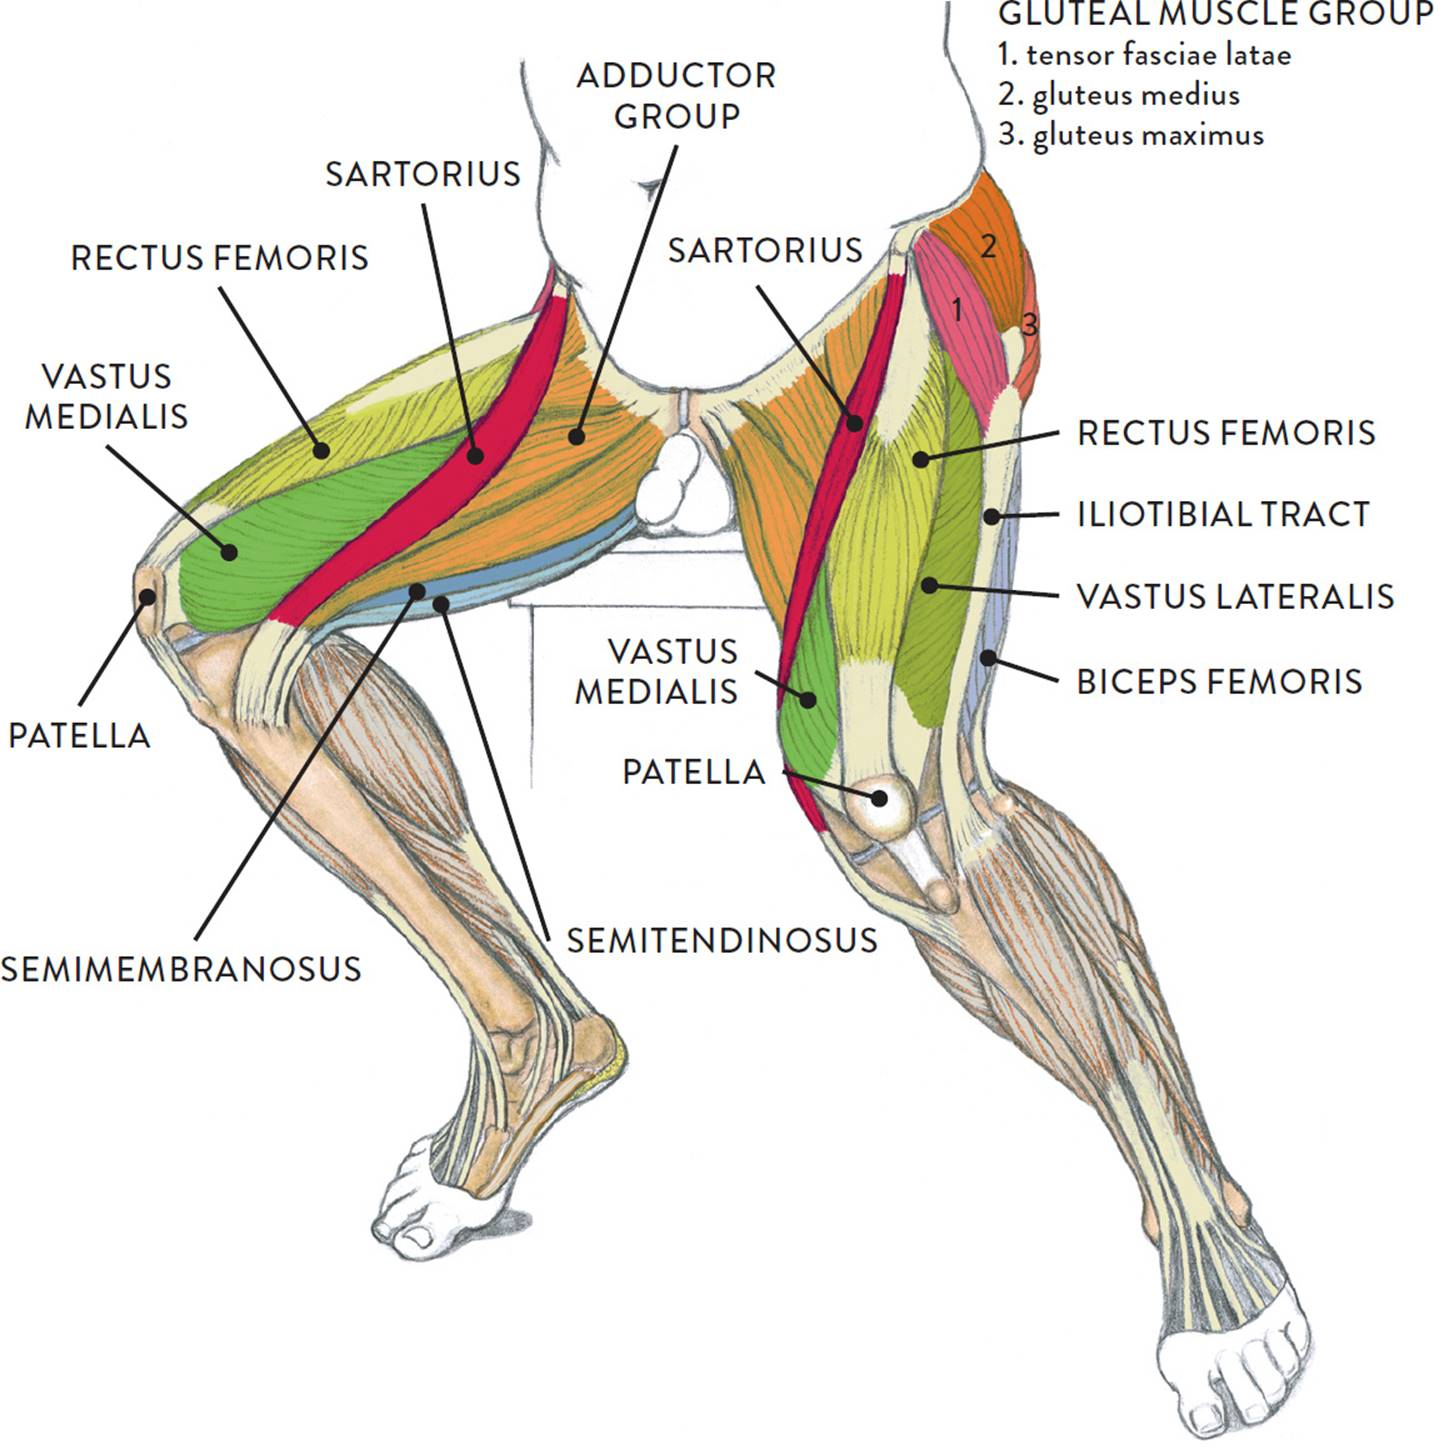 Leg Muscles Diagram Muscles Of The Leg And Foot Classic Human Anatomy In Motion The